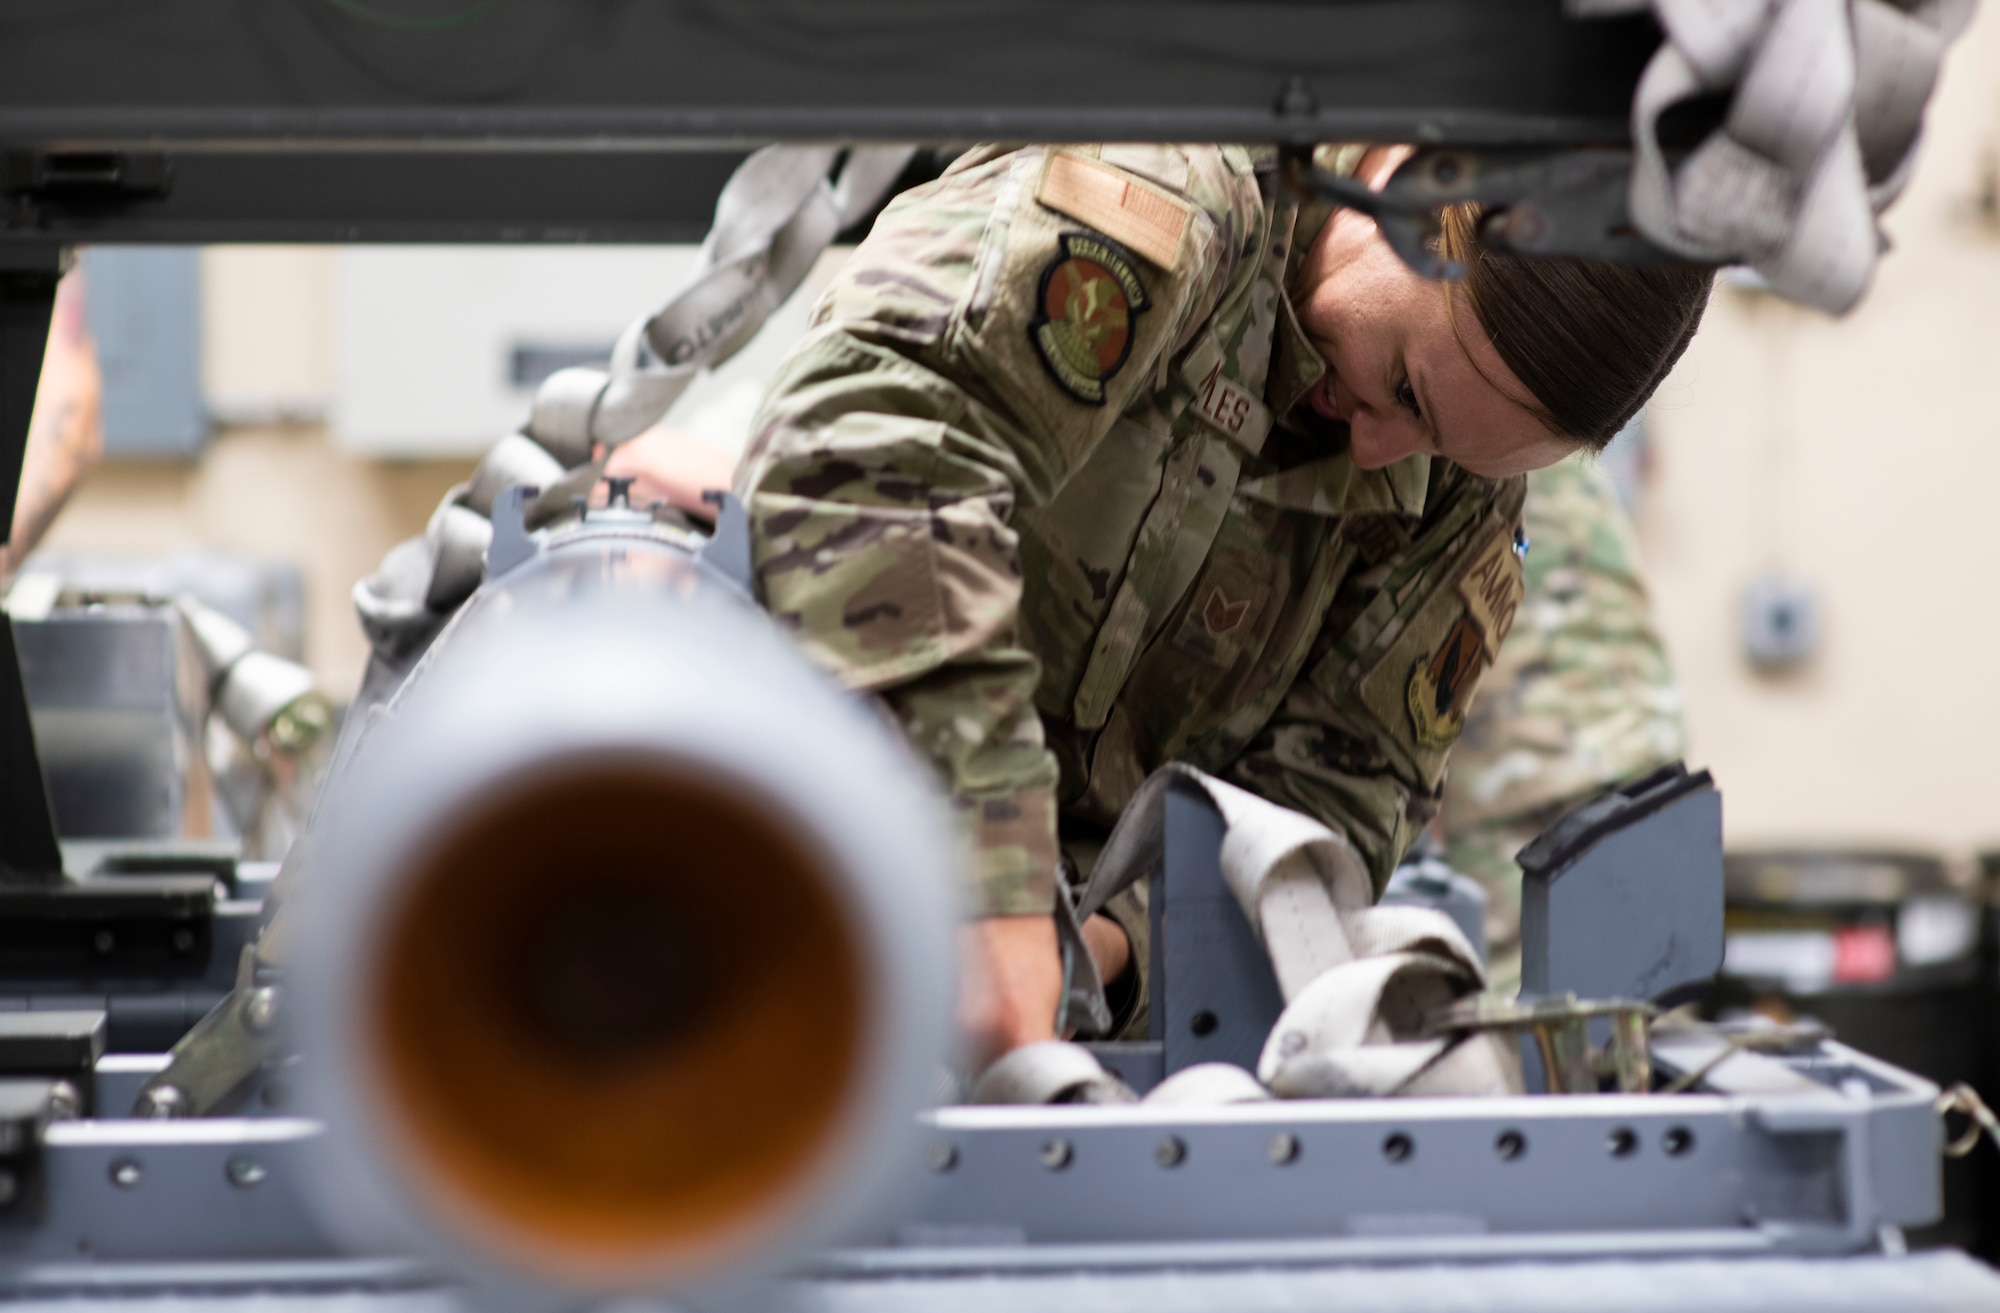 U.S. Air Force Staff Sgt. Jacqueline Nettles, 325th Munitions Squadron production supervisor, ensures munitions are securely strapped to a munitions handling trailer at Tyndall Air Force Base, Florida, May 10, 2022.